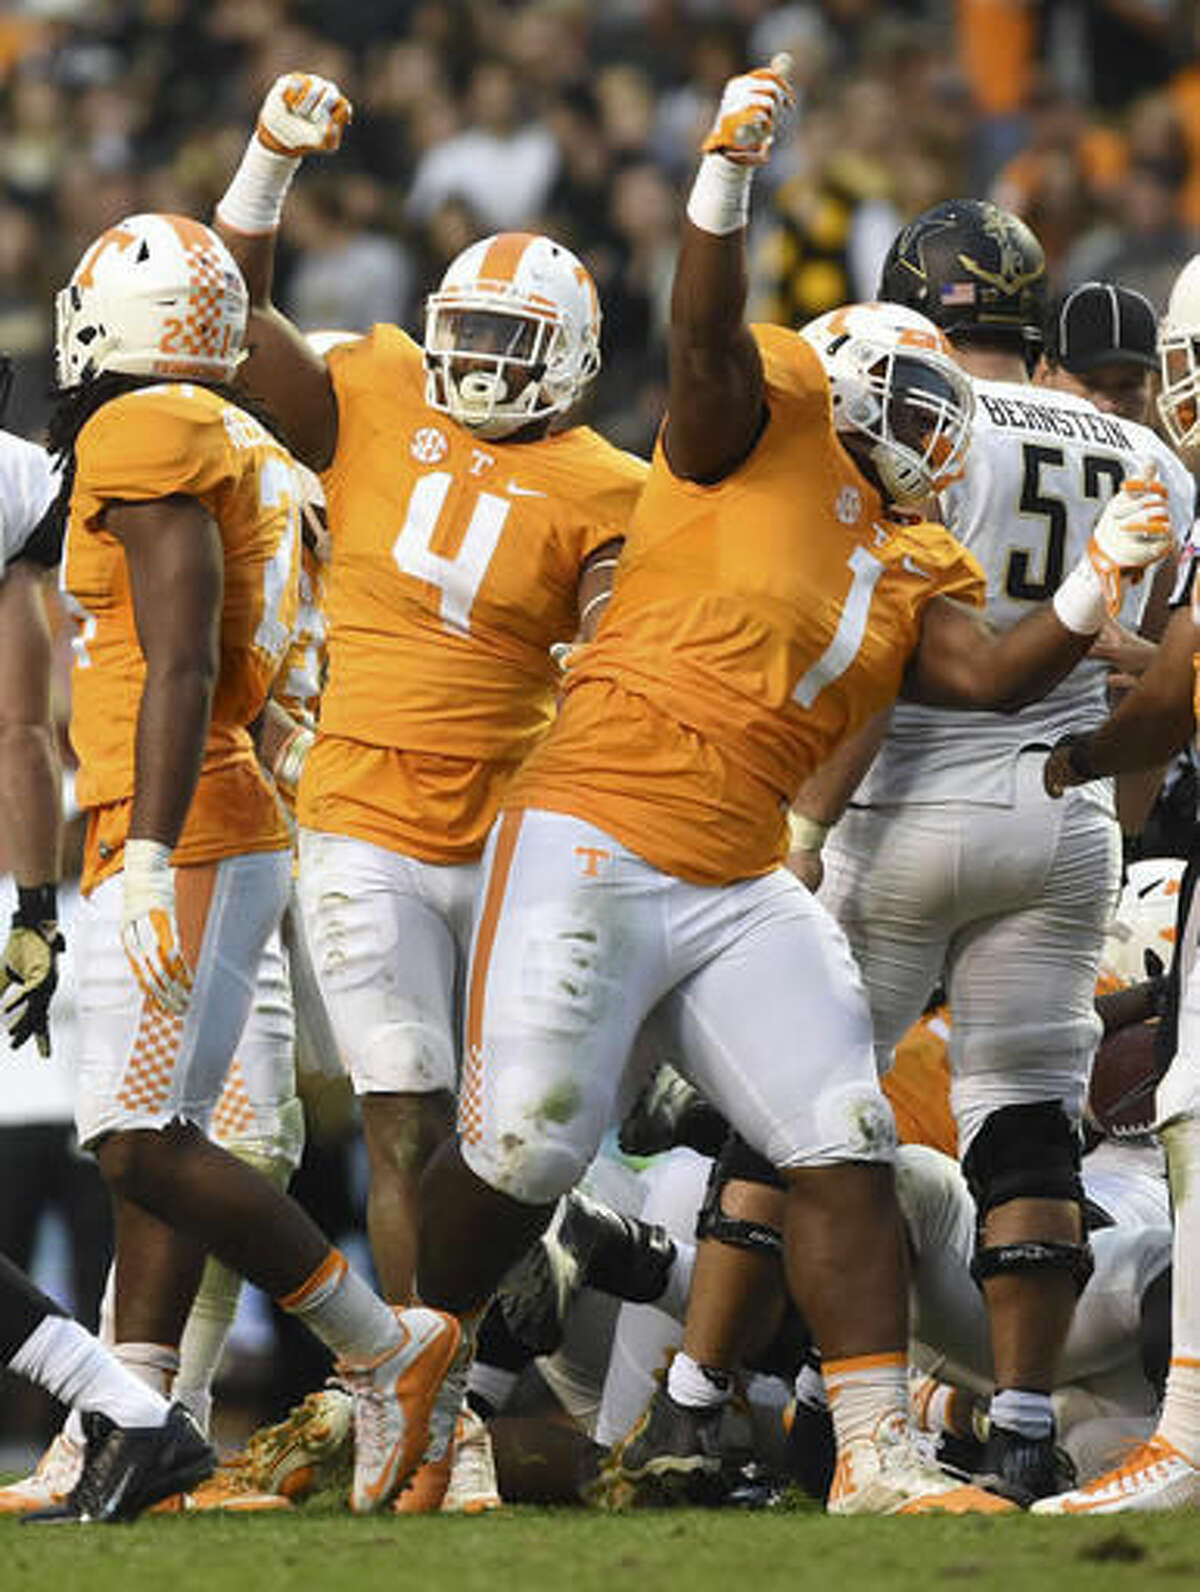 Tennessee defensive linemen Kahlil McKenzie, right, and LaTroy Lewis celebrate after making a play against Vanderbilt during a NCAA football game Saturday, Nov. 28, 2015, in Knoxville, Tenn. (Adam Lau/Knoxville News Sentinel via AP)